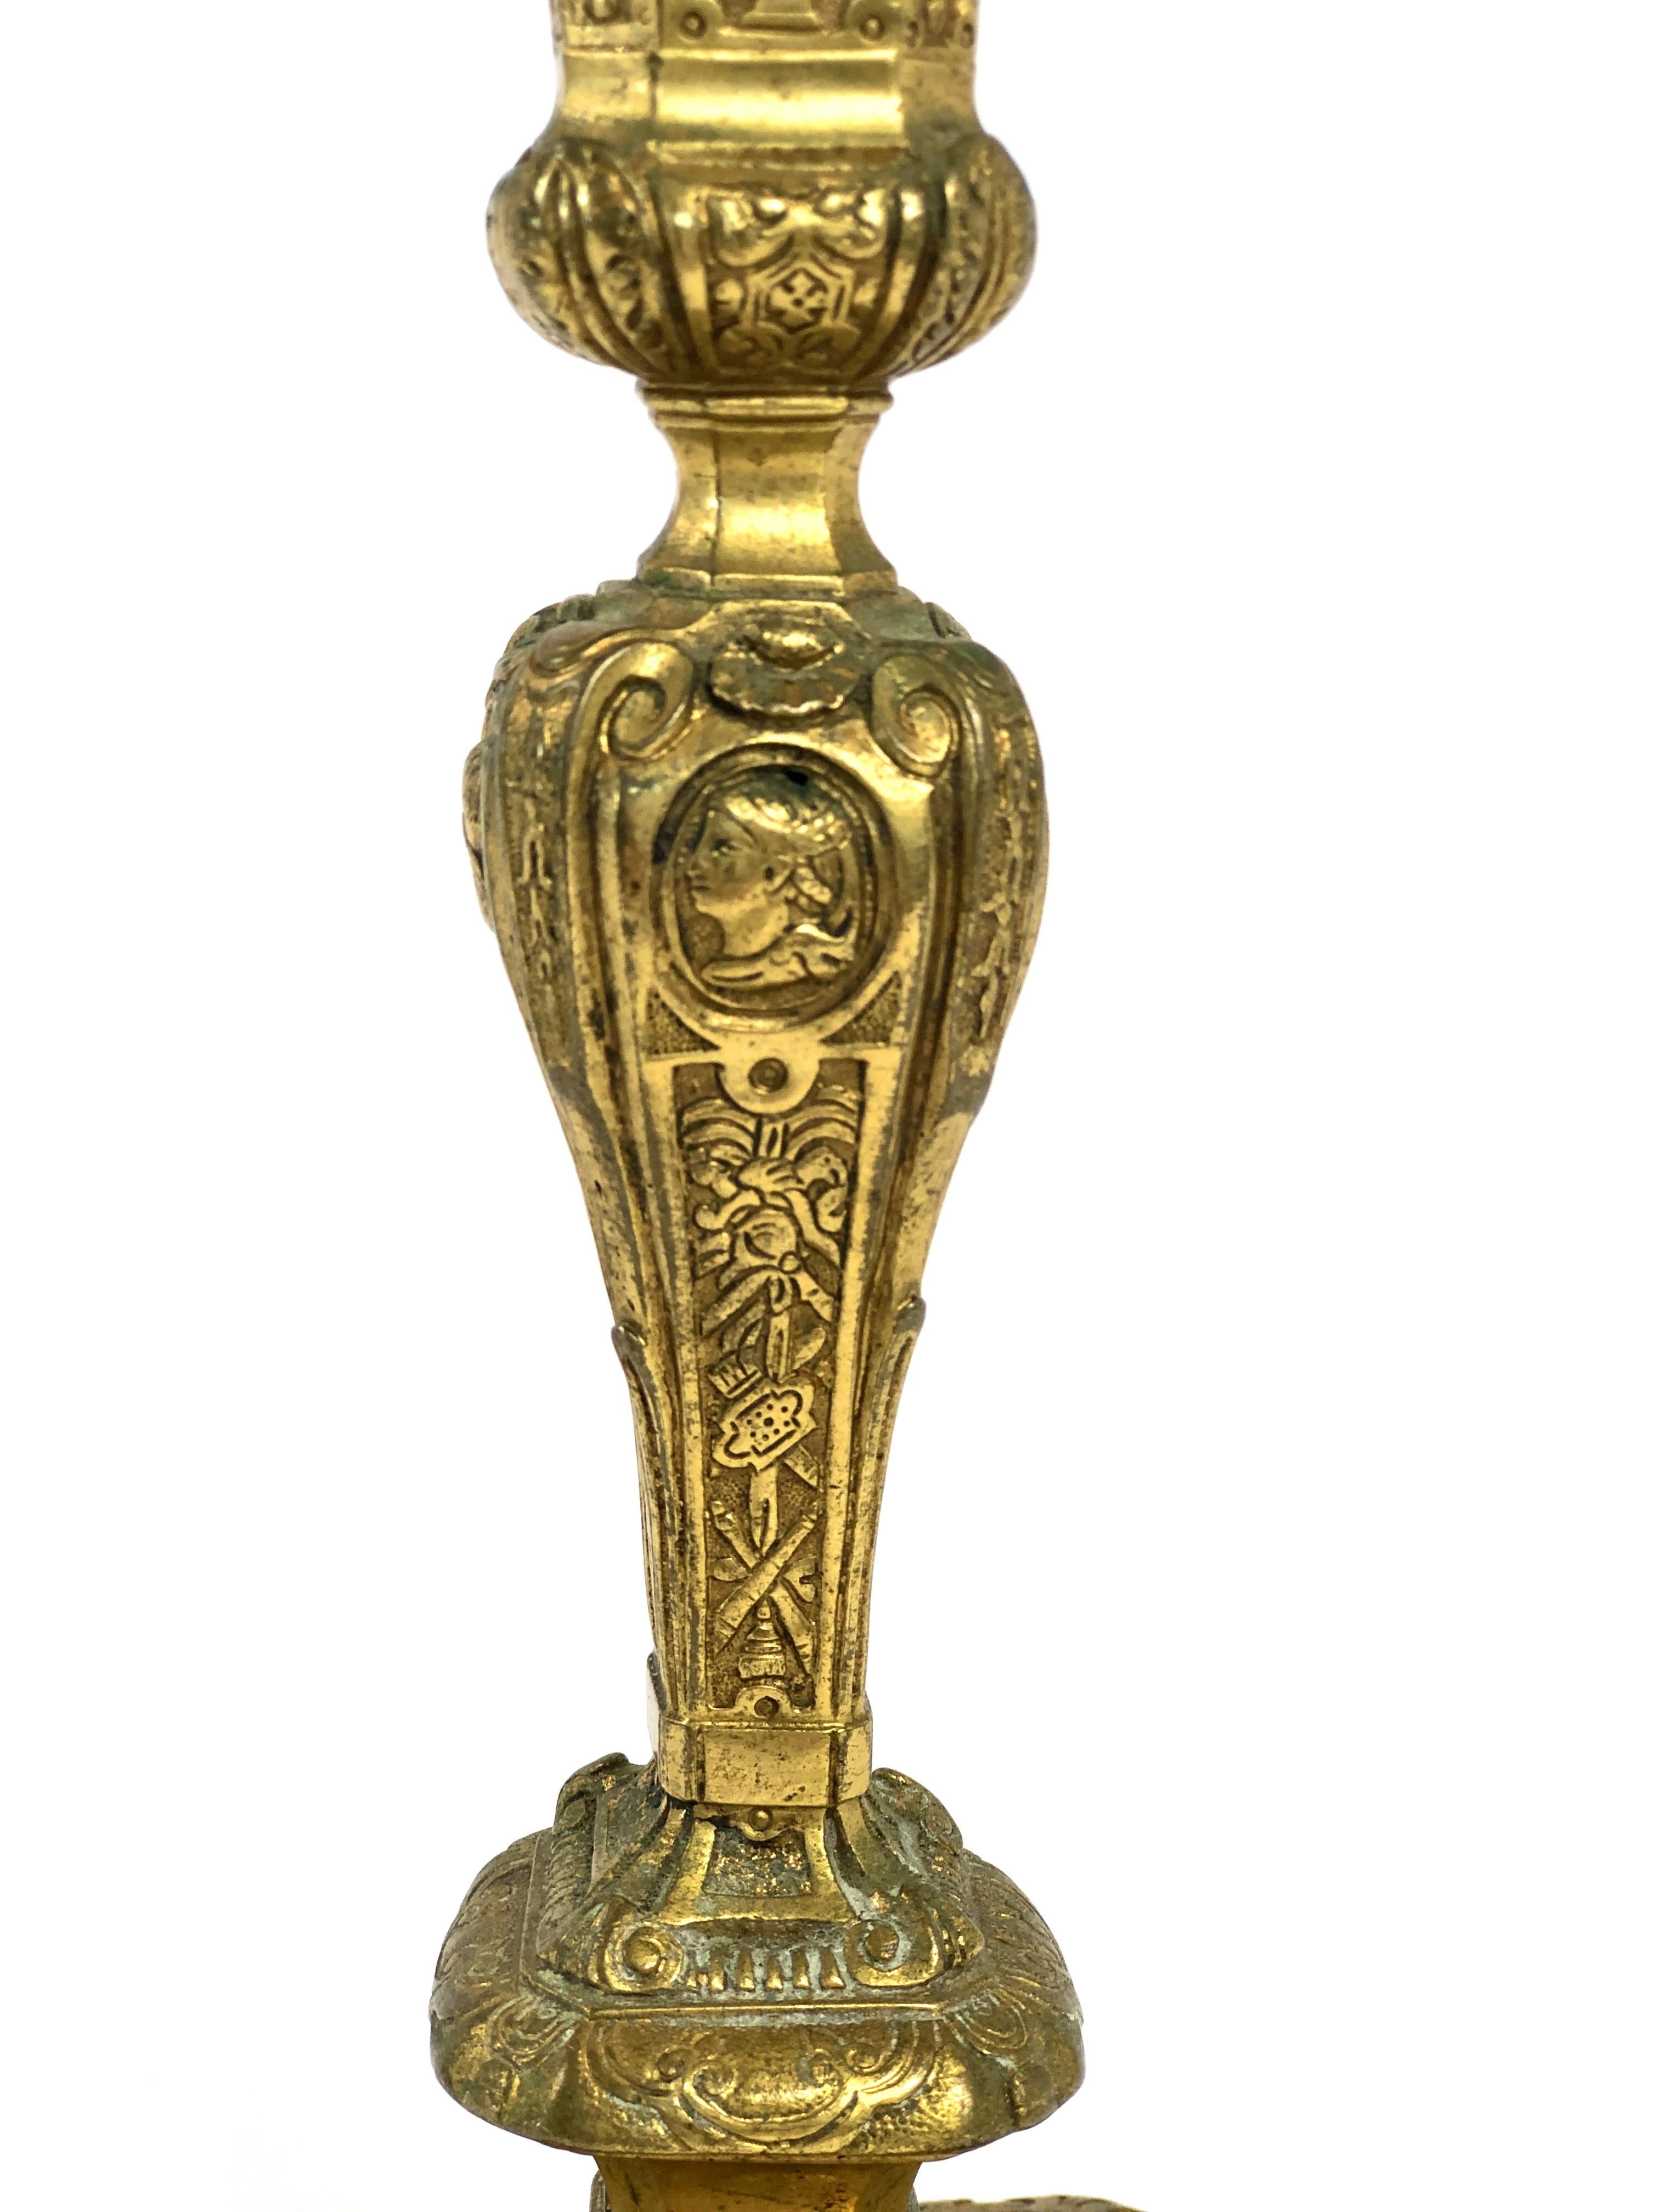 A magnificent Louis XIV style candlestick, dating from the 19th century, in finely chiseled and gilded bronze. Its baluster-shaped barrel is richly ornamented with swags and swirls, motifs of vases, fantastical creatures, draperies and acanthus